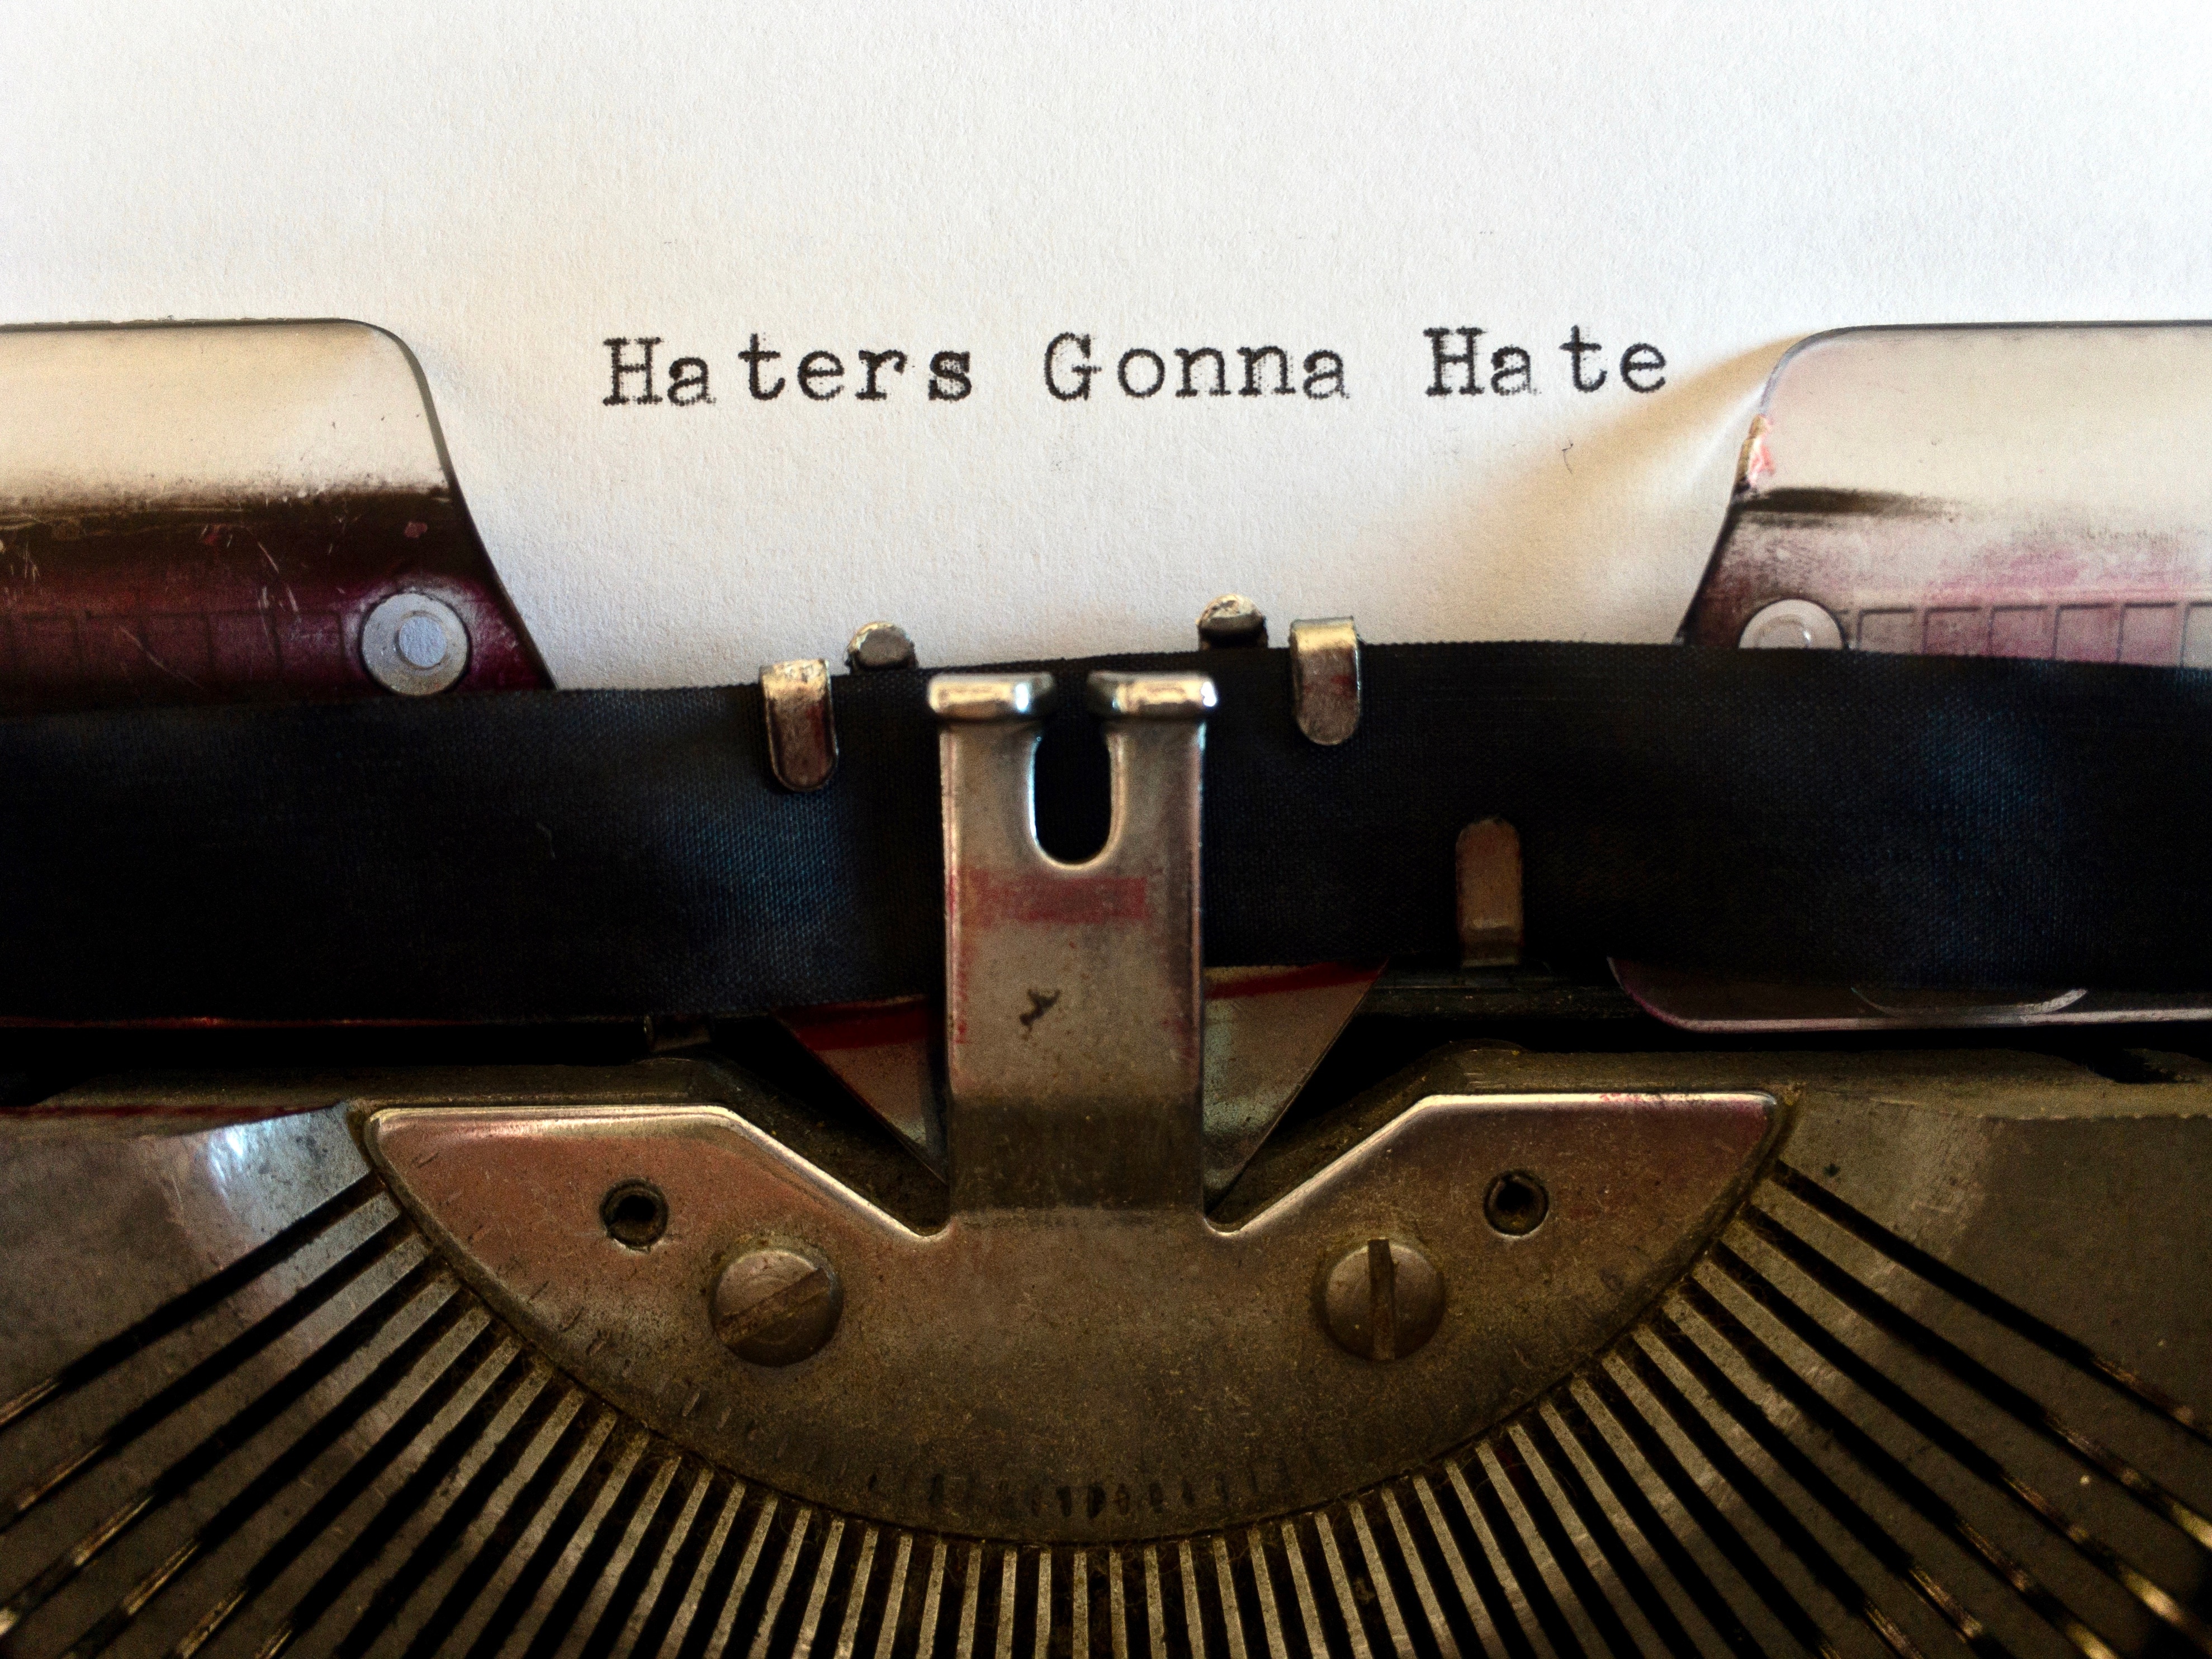 Diverse books and the haters